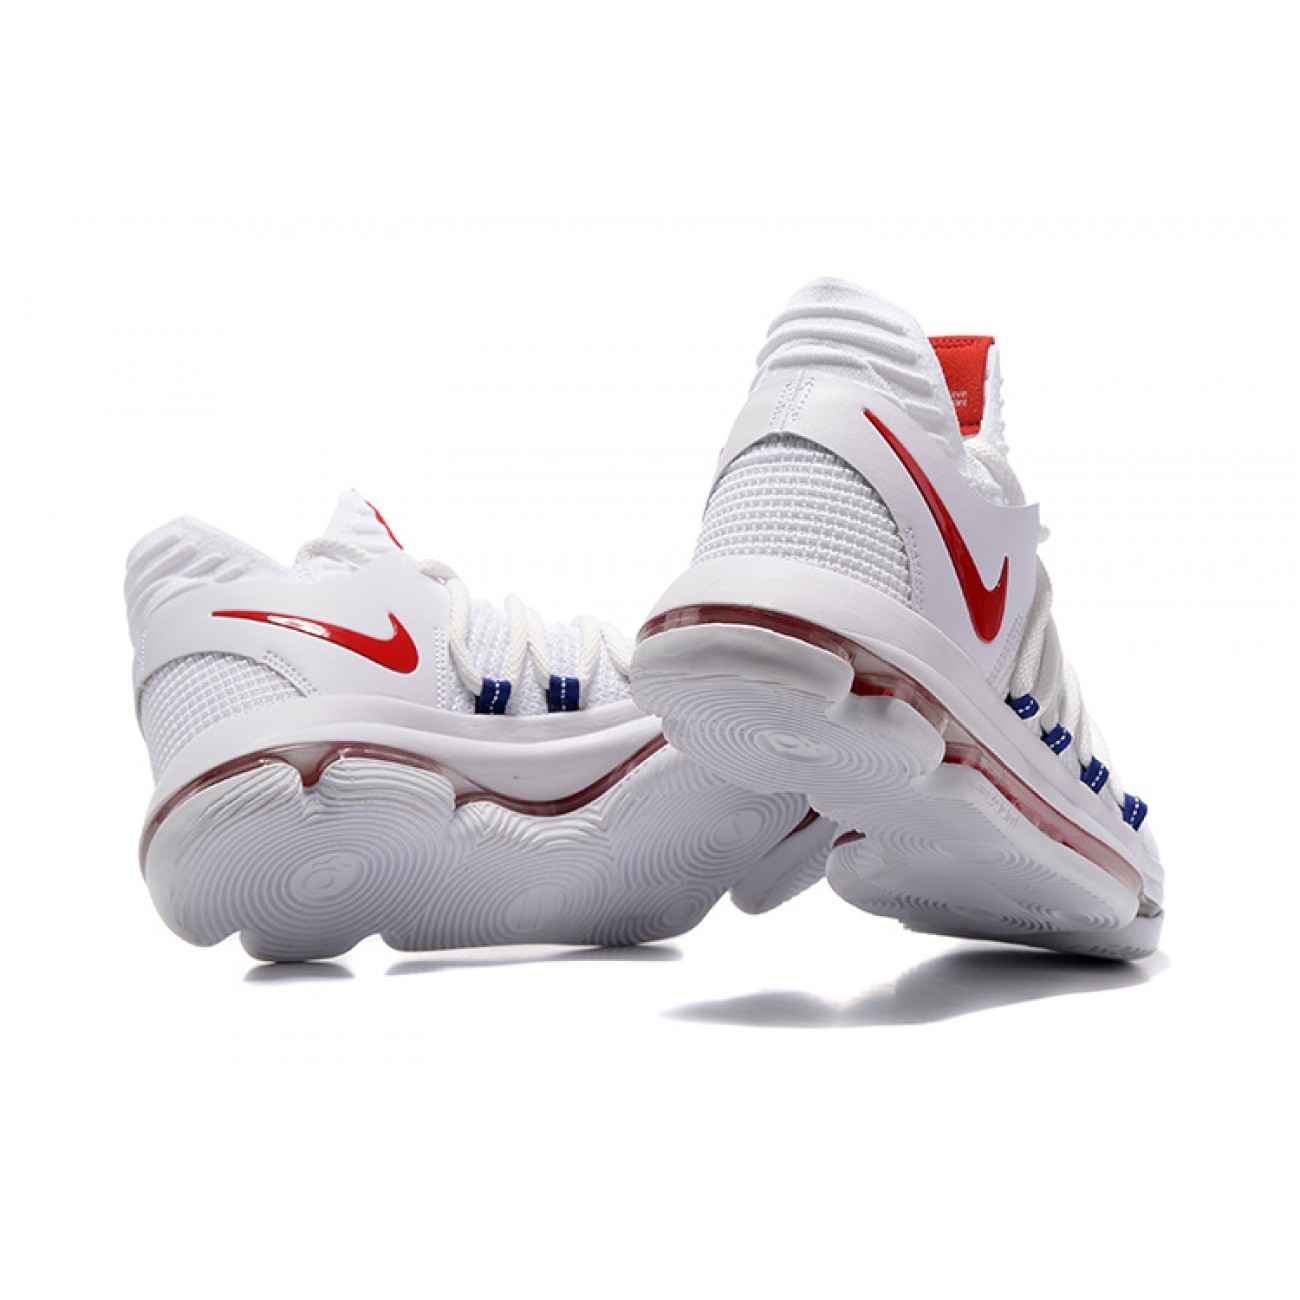 Kevin Durant KD10 "USA Team" White/Blue/Red